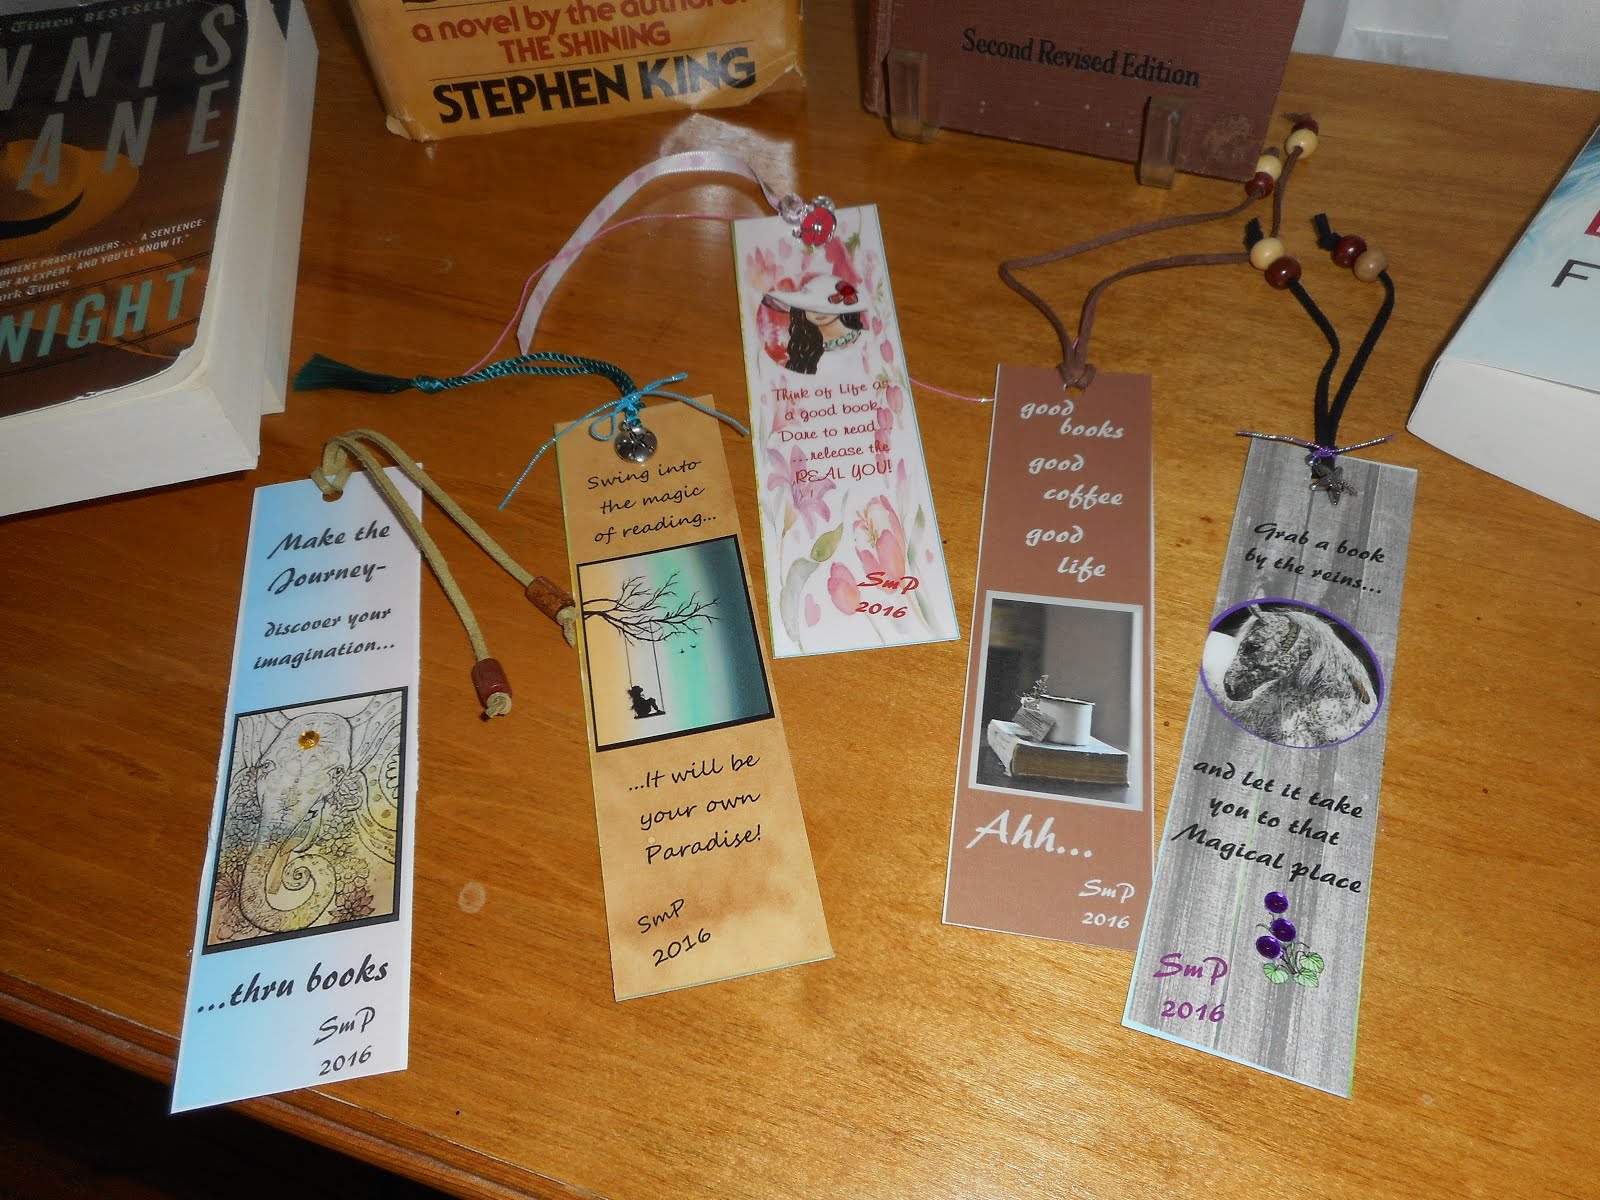 Some of my bookmark designs